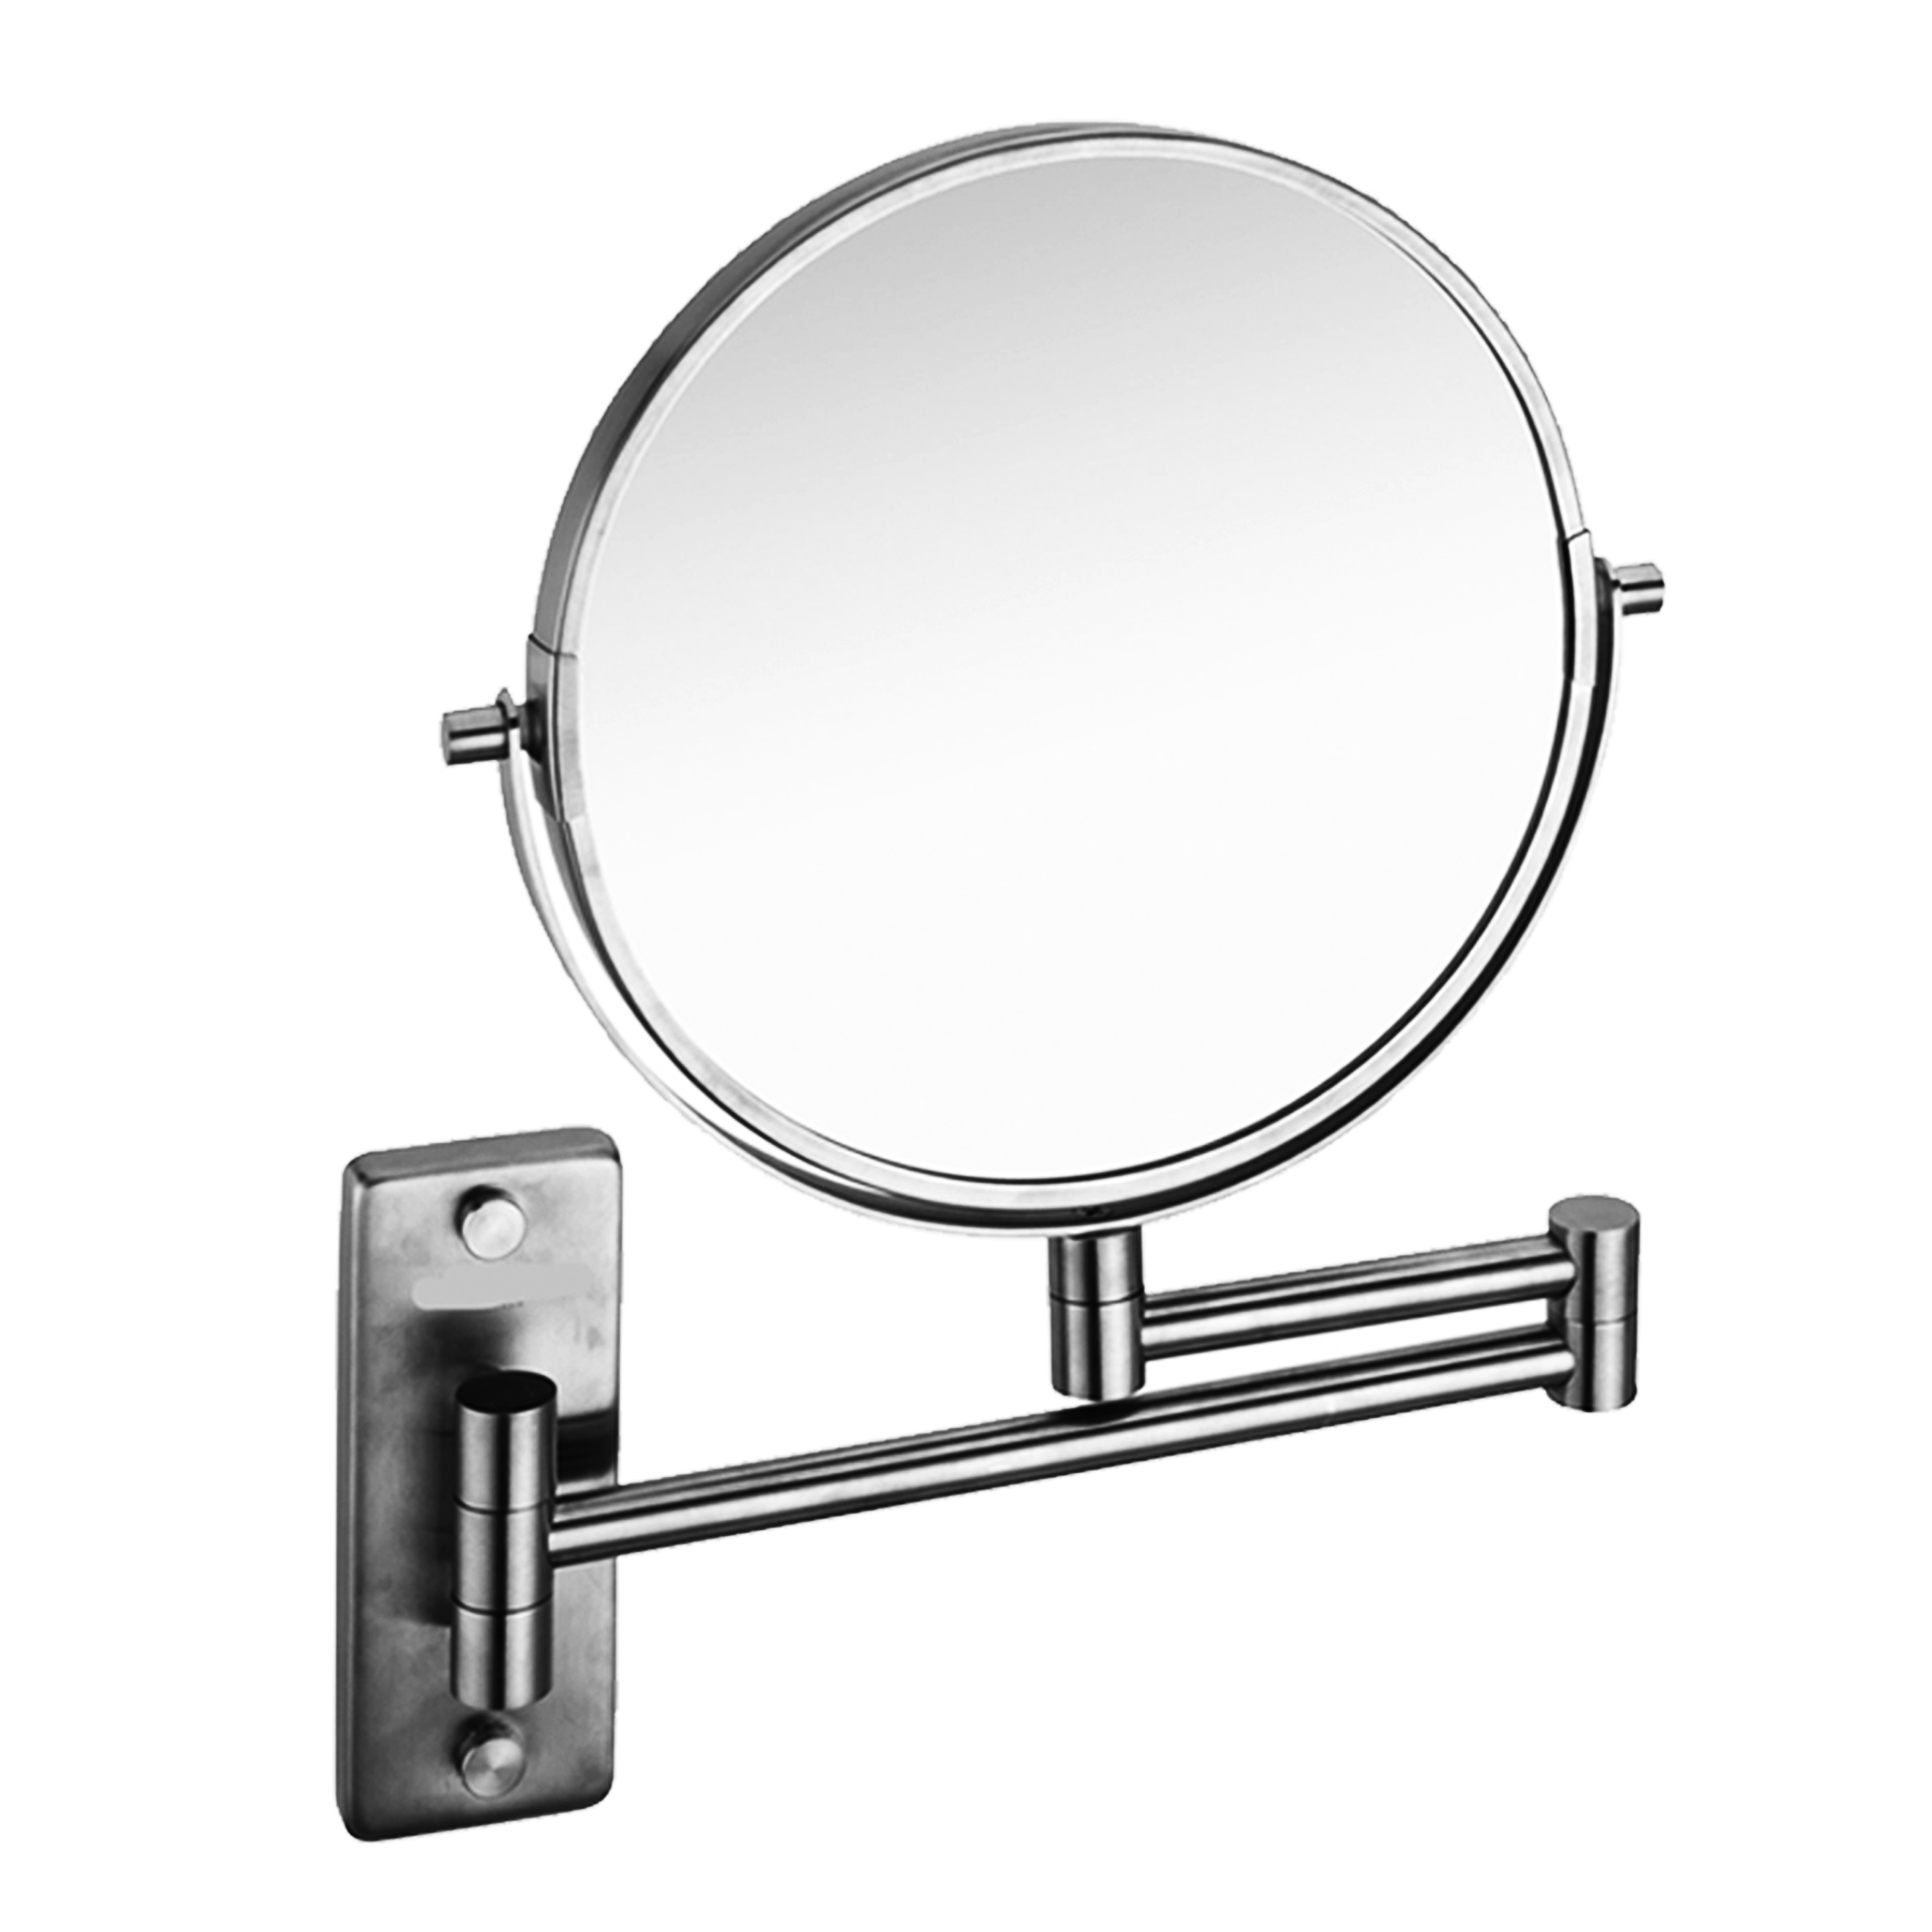 FV-6317-Swivel-Rotating-Magnify-Mirror-3X-304-Stainless-Steel